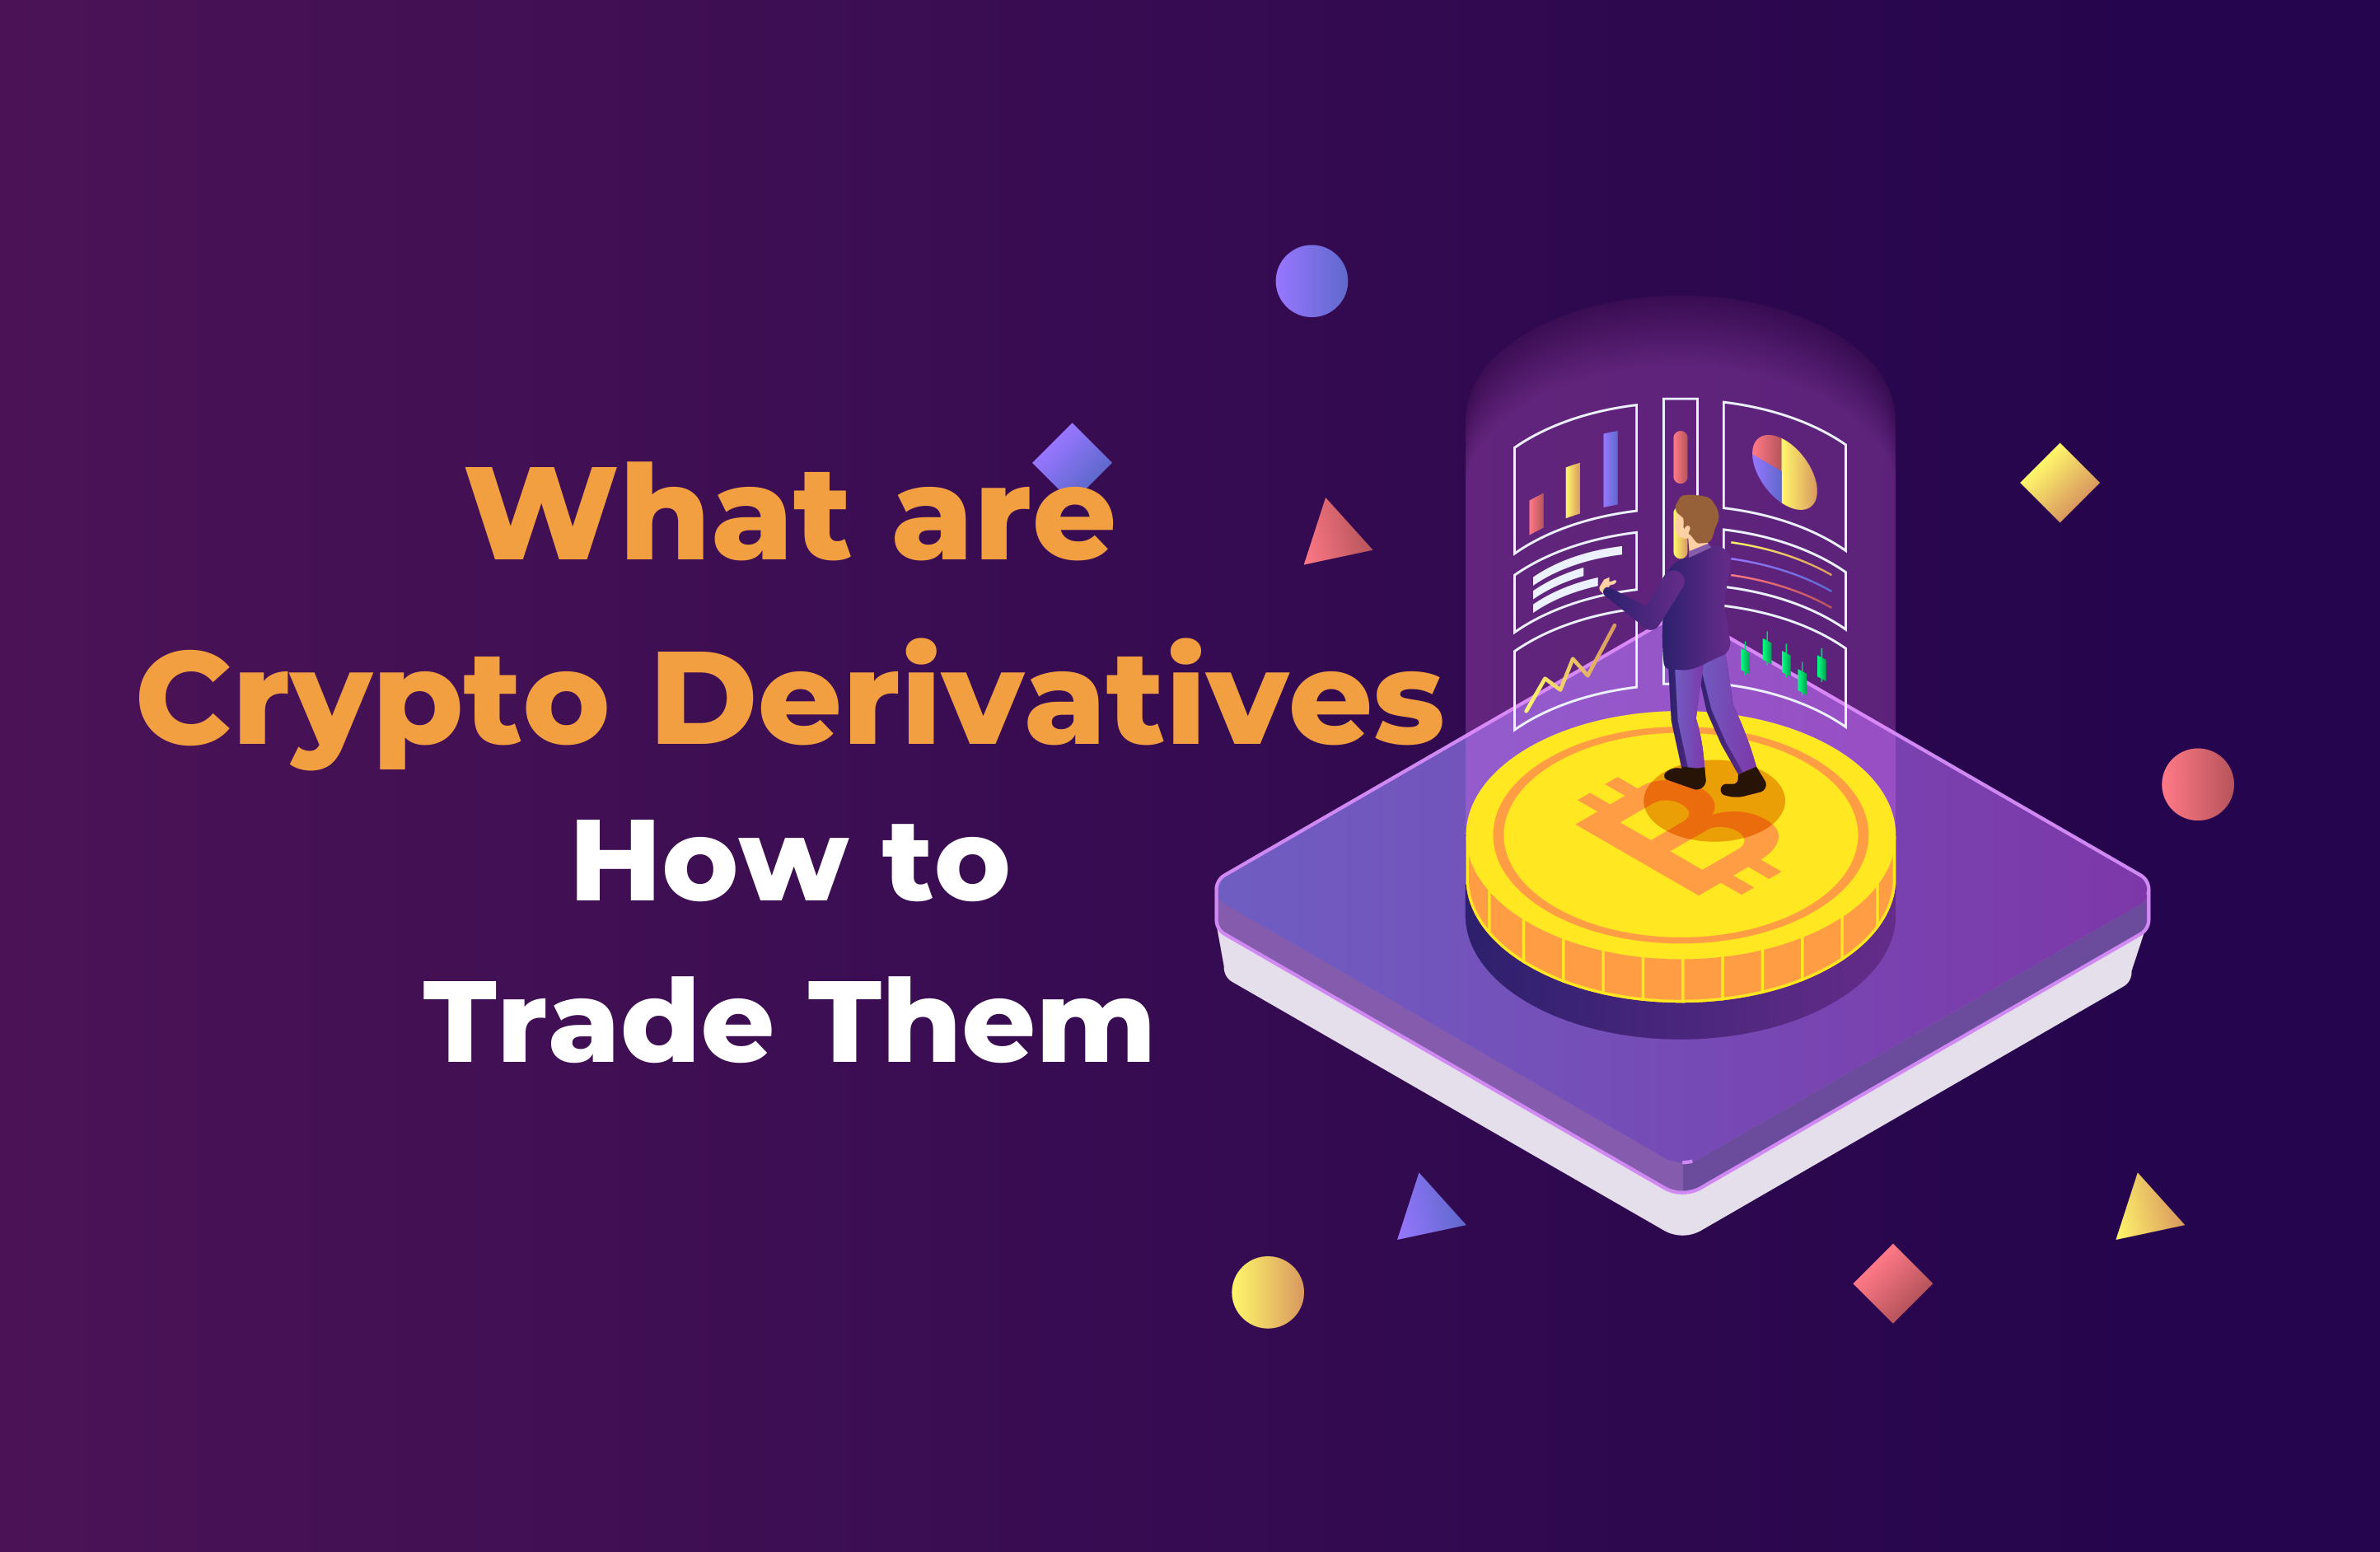 What are Crypto Derivatives